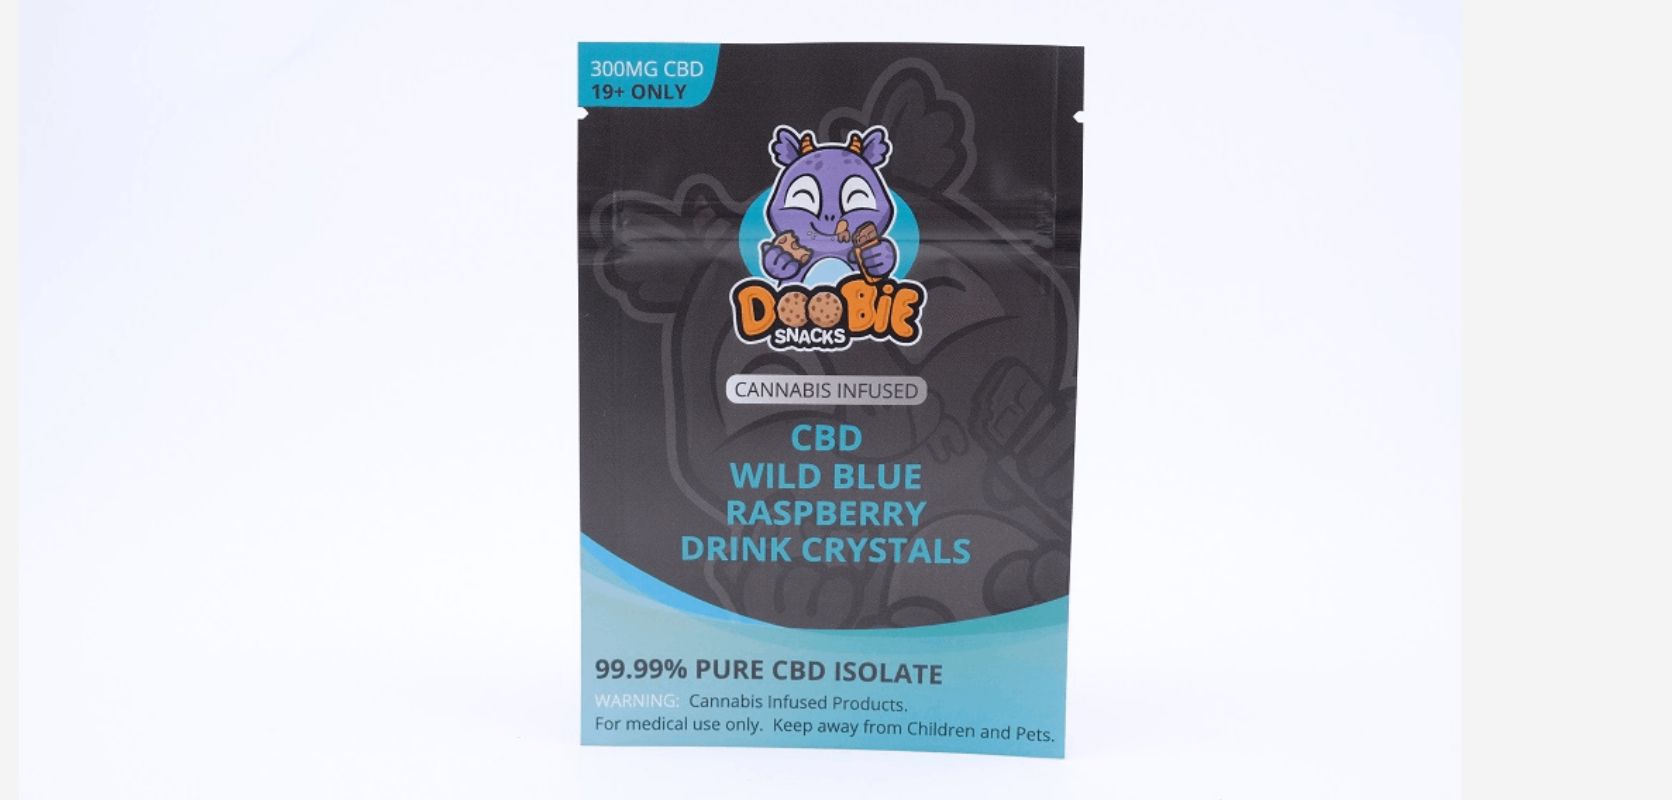 Crystal Drinks CBD is a range of tasty, effective cannabis drinks from doobie snacks. These drinks are made using CBD instead of THC. 